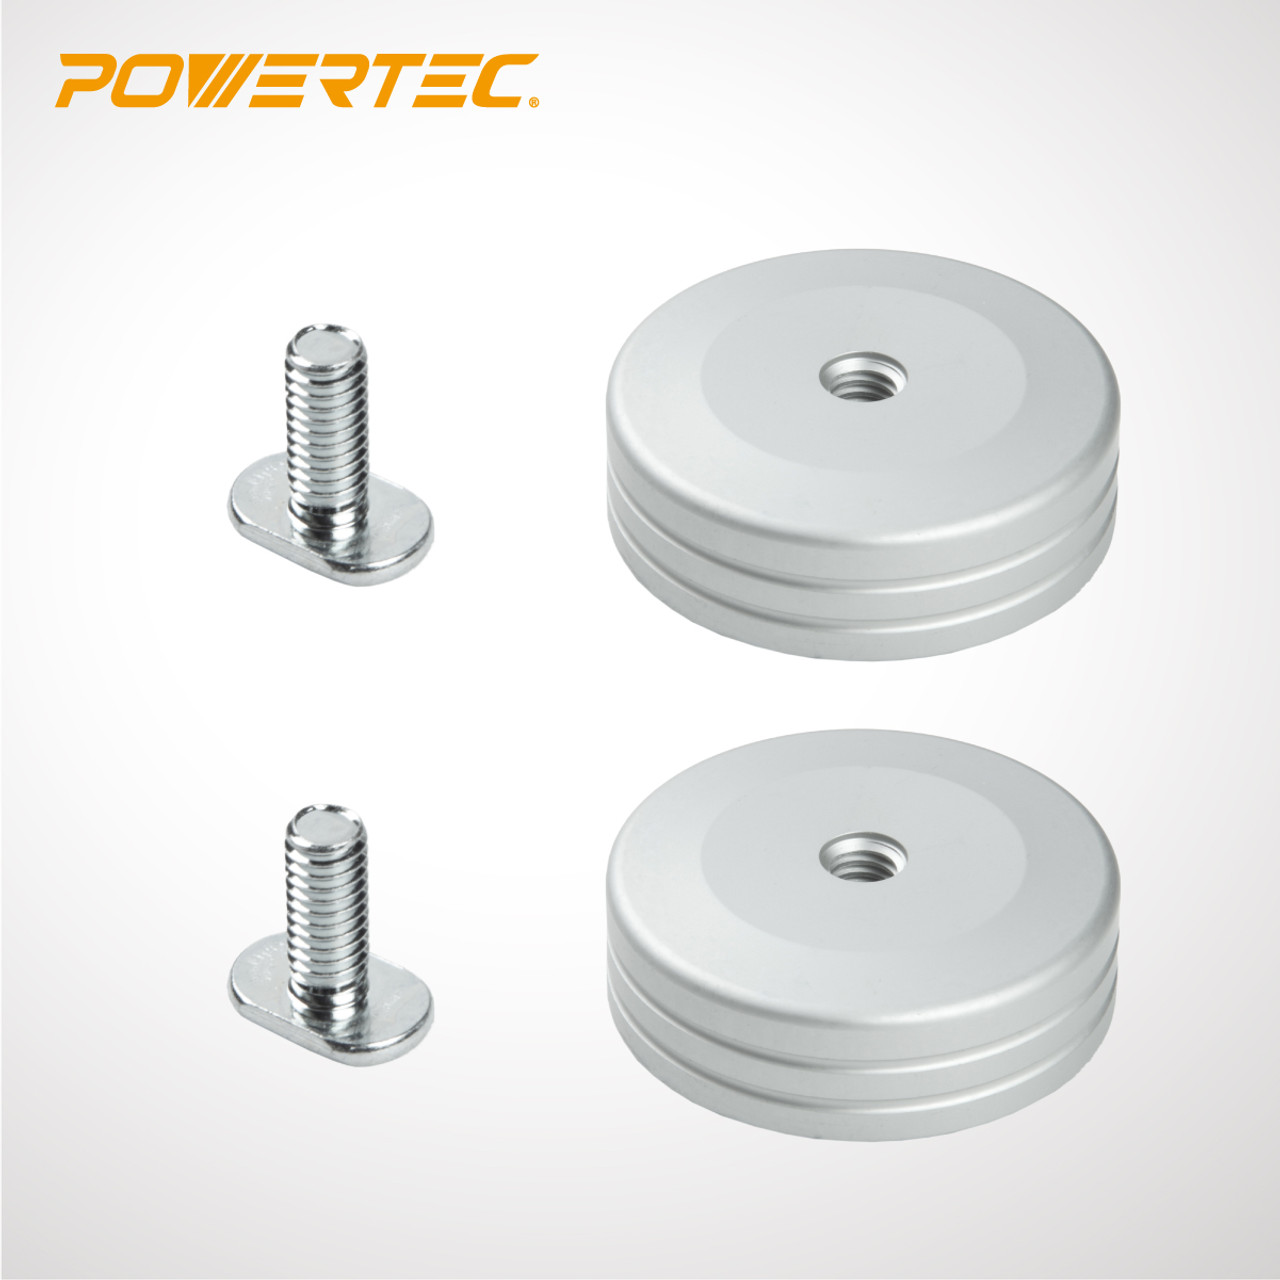 POWERTEC-71669 Universal T-Track Round Stop for Circular or Angle